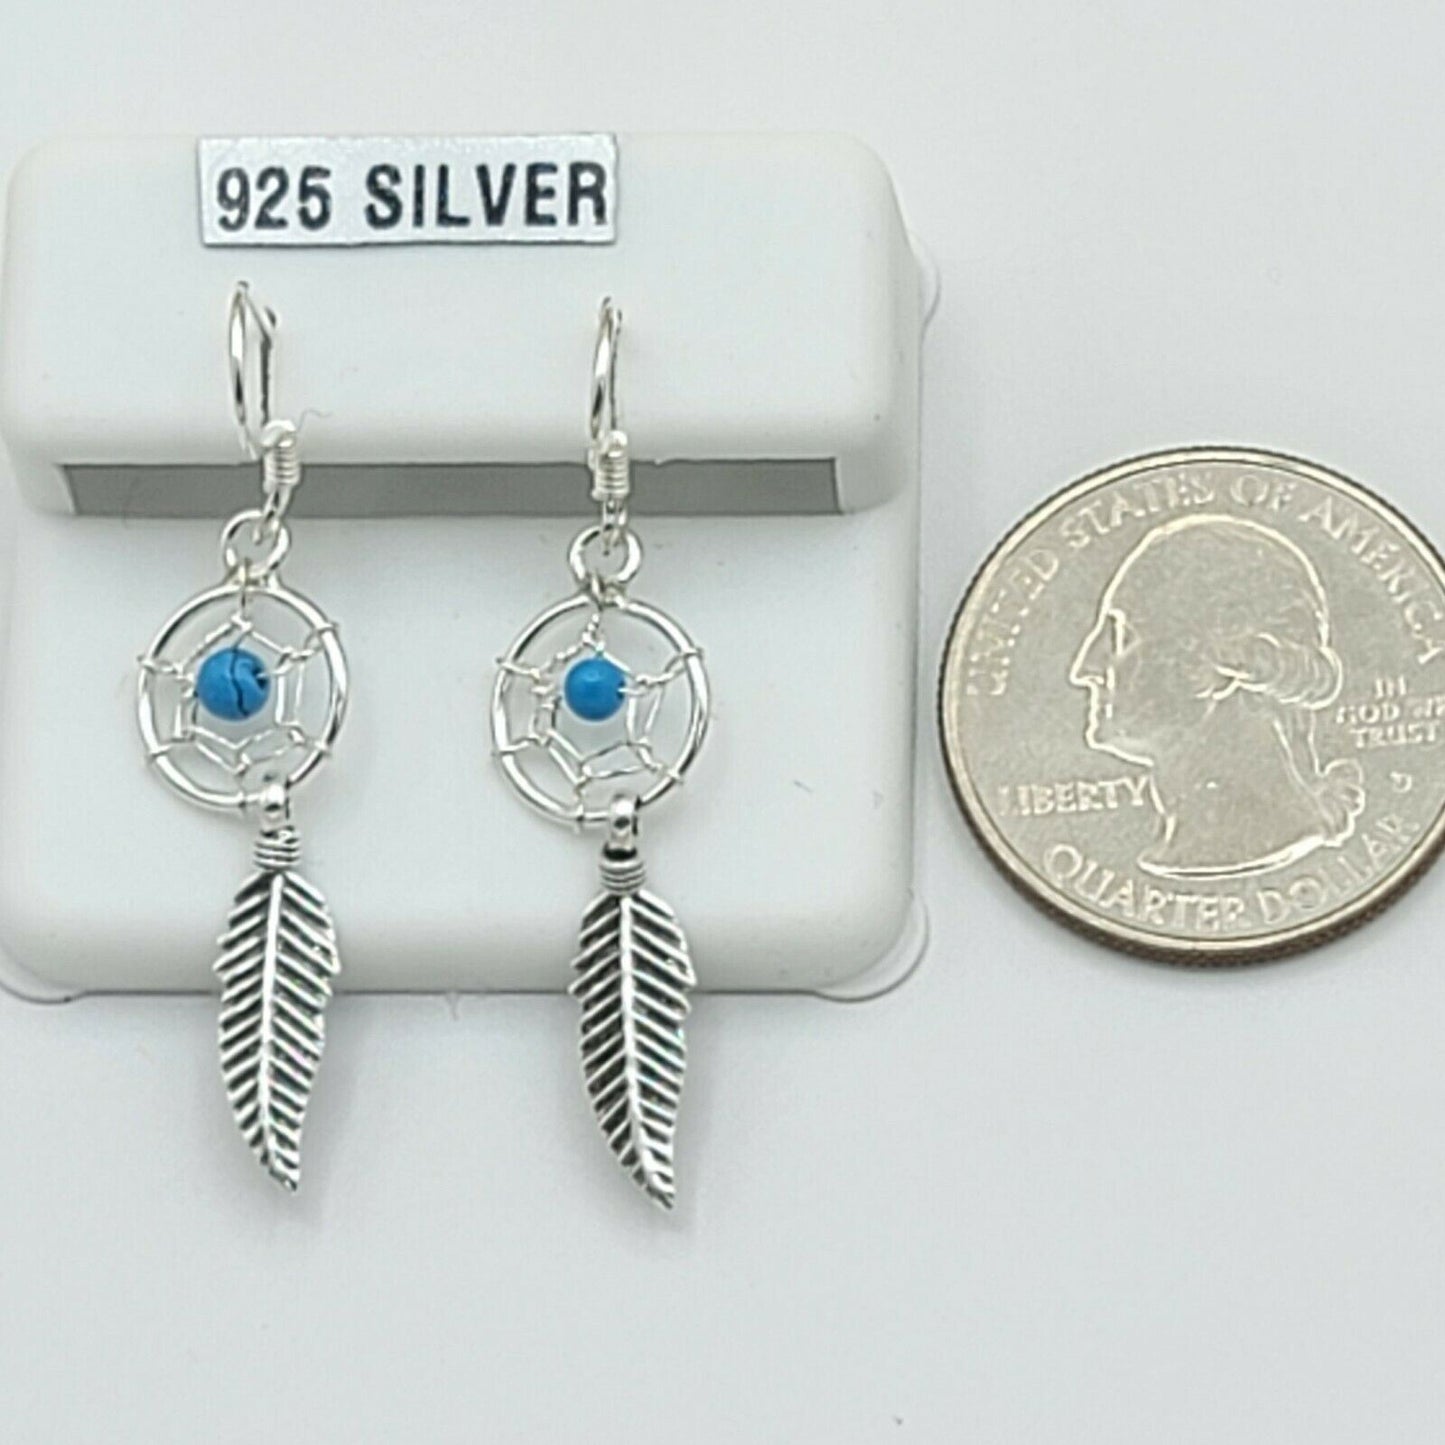 Solid 925 Sterling Silver. Turquoise bead Dreamcatcher Feather Earrings